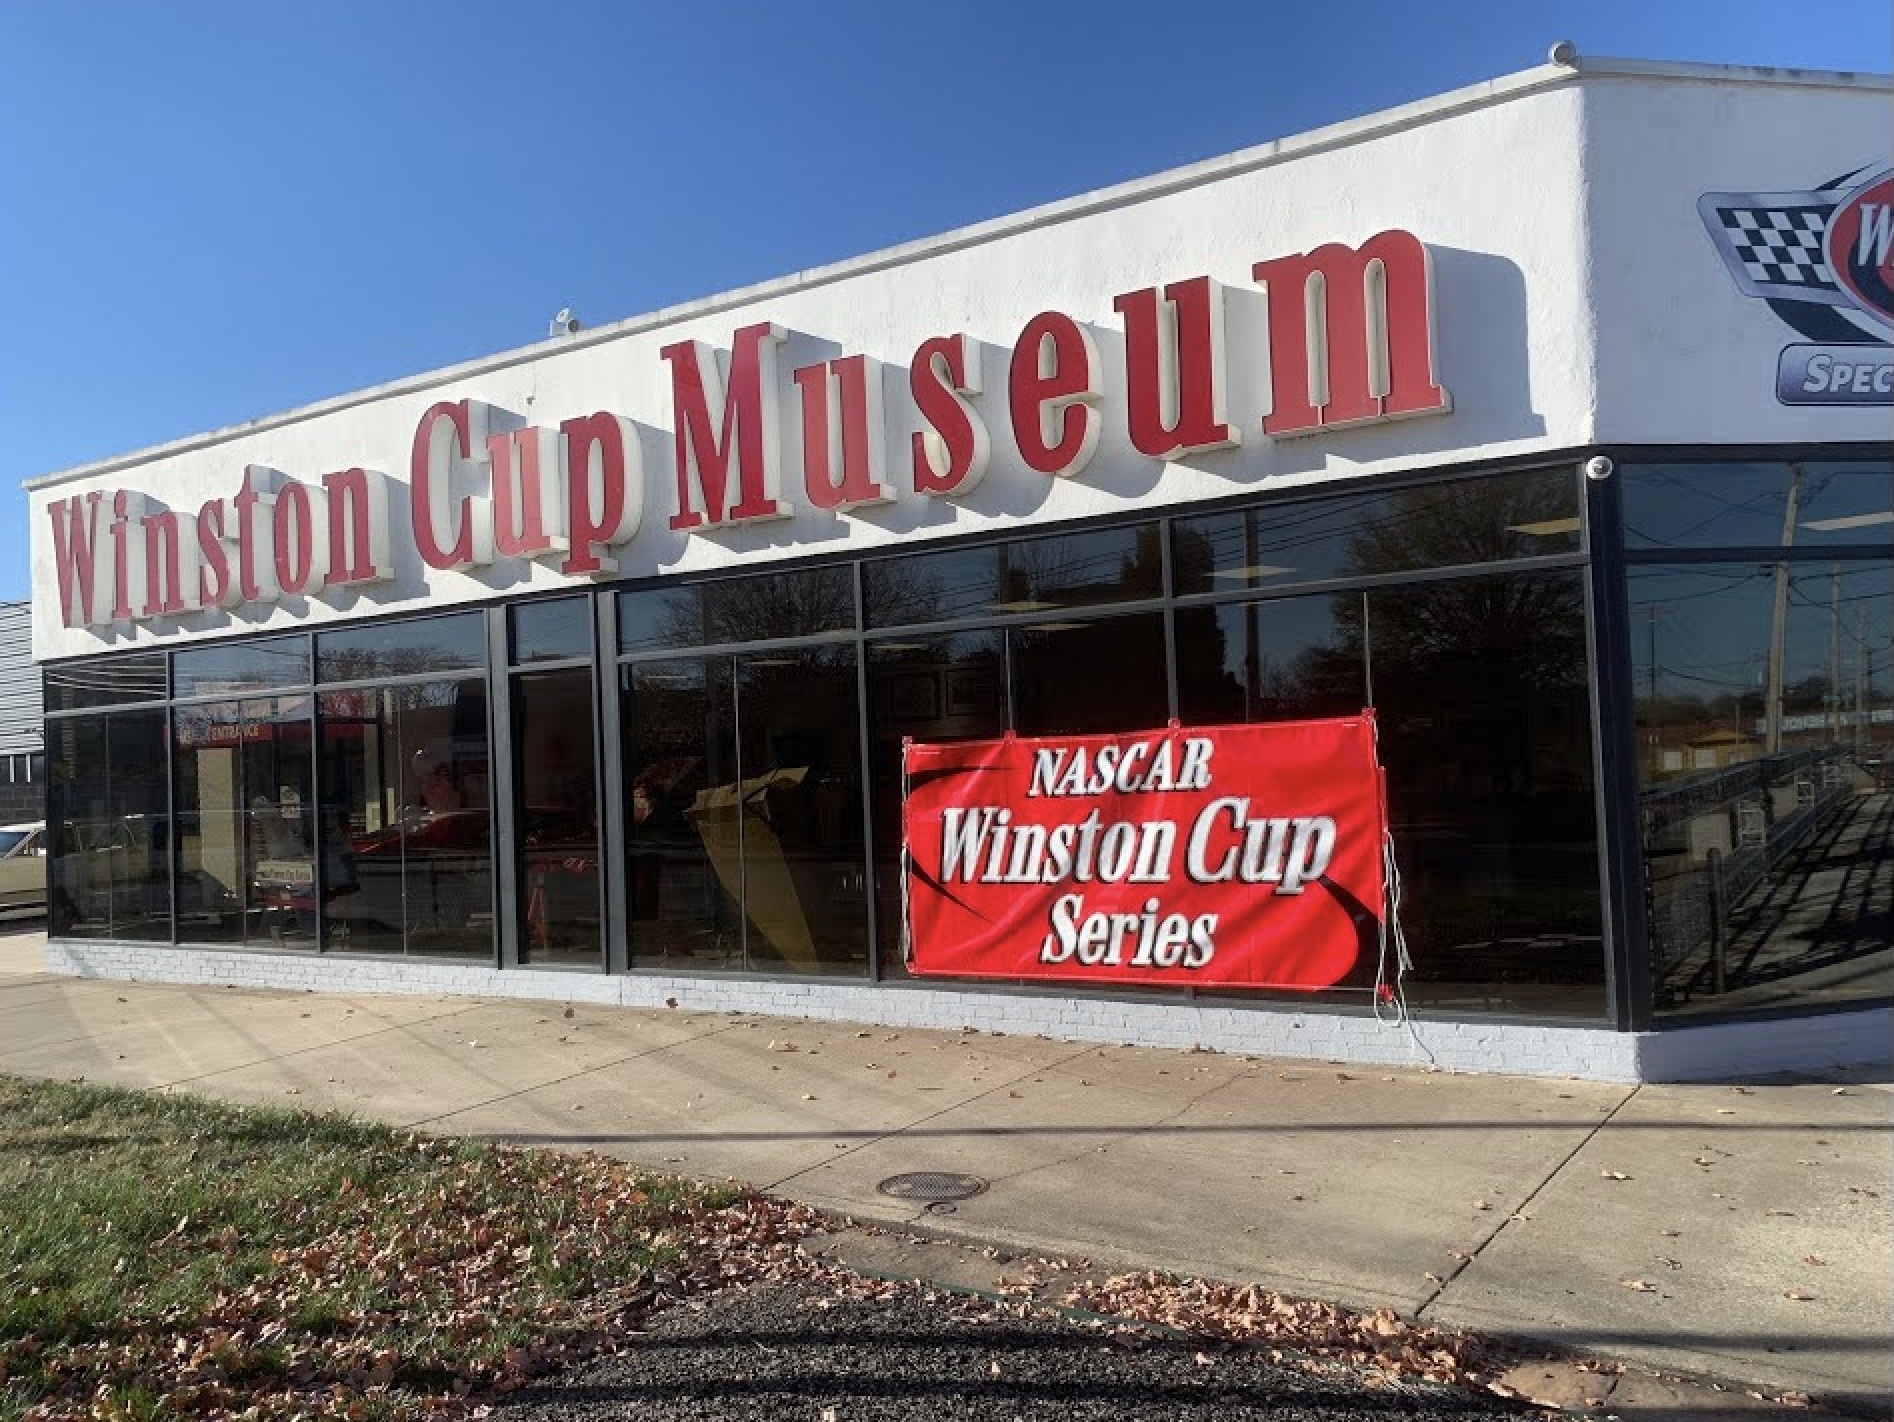 Why the Winston Cup Museum Mattered